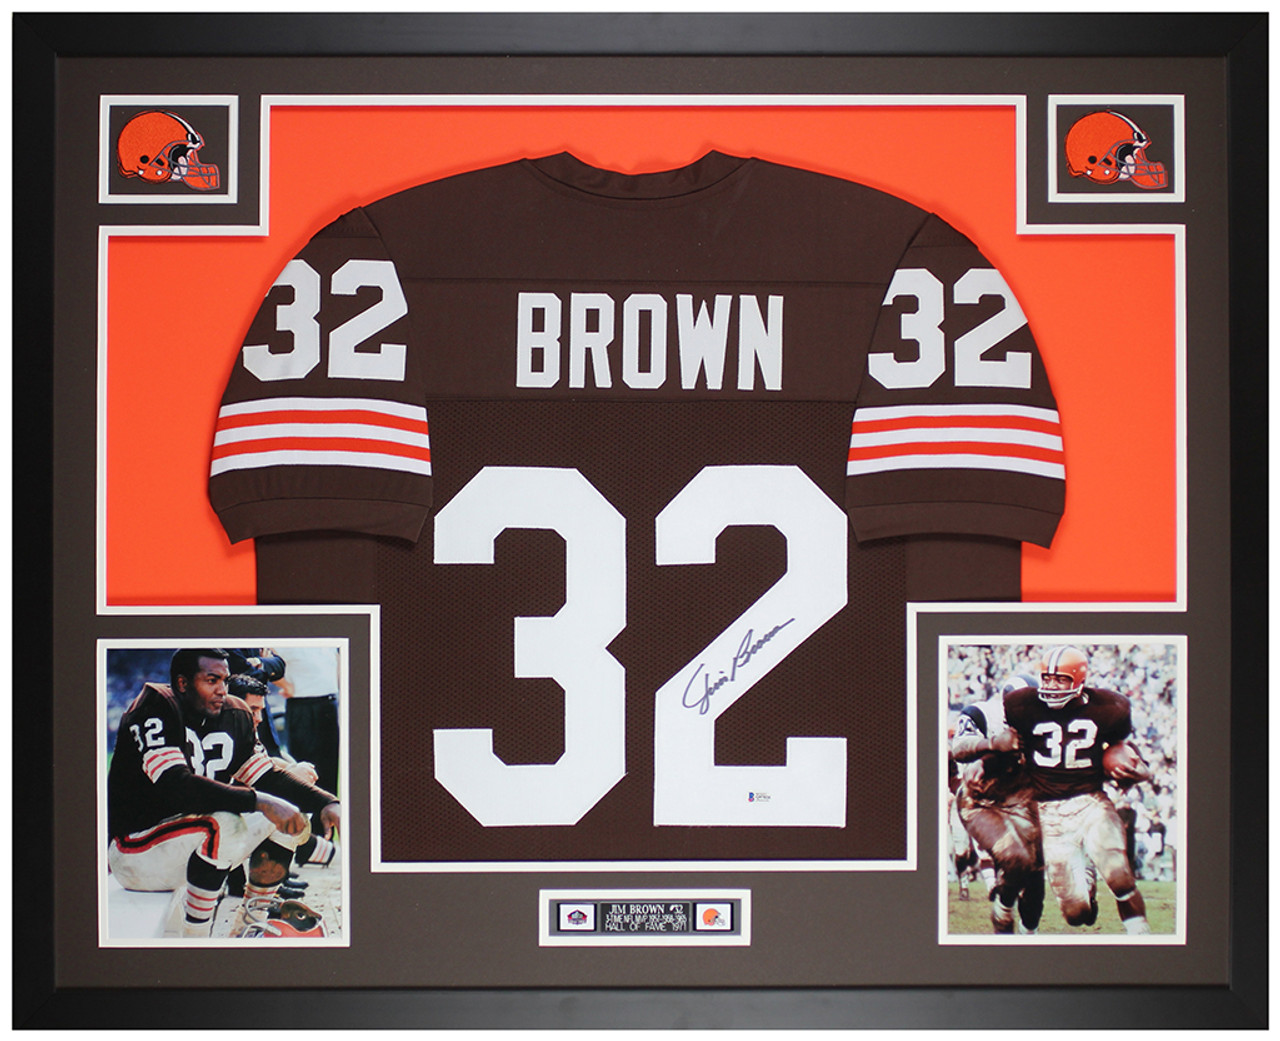 Jim Brown Autographed and Framed Cleveland Browns Jersey